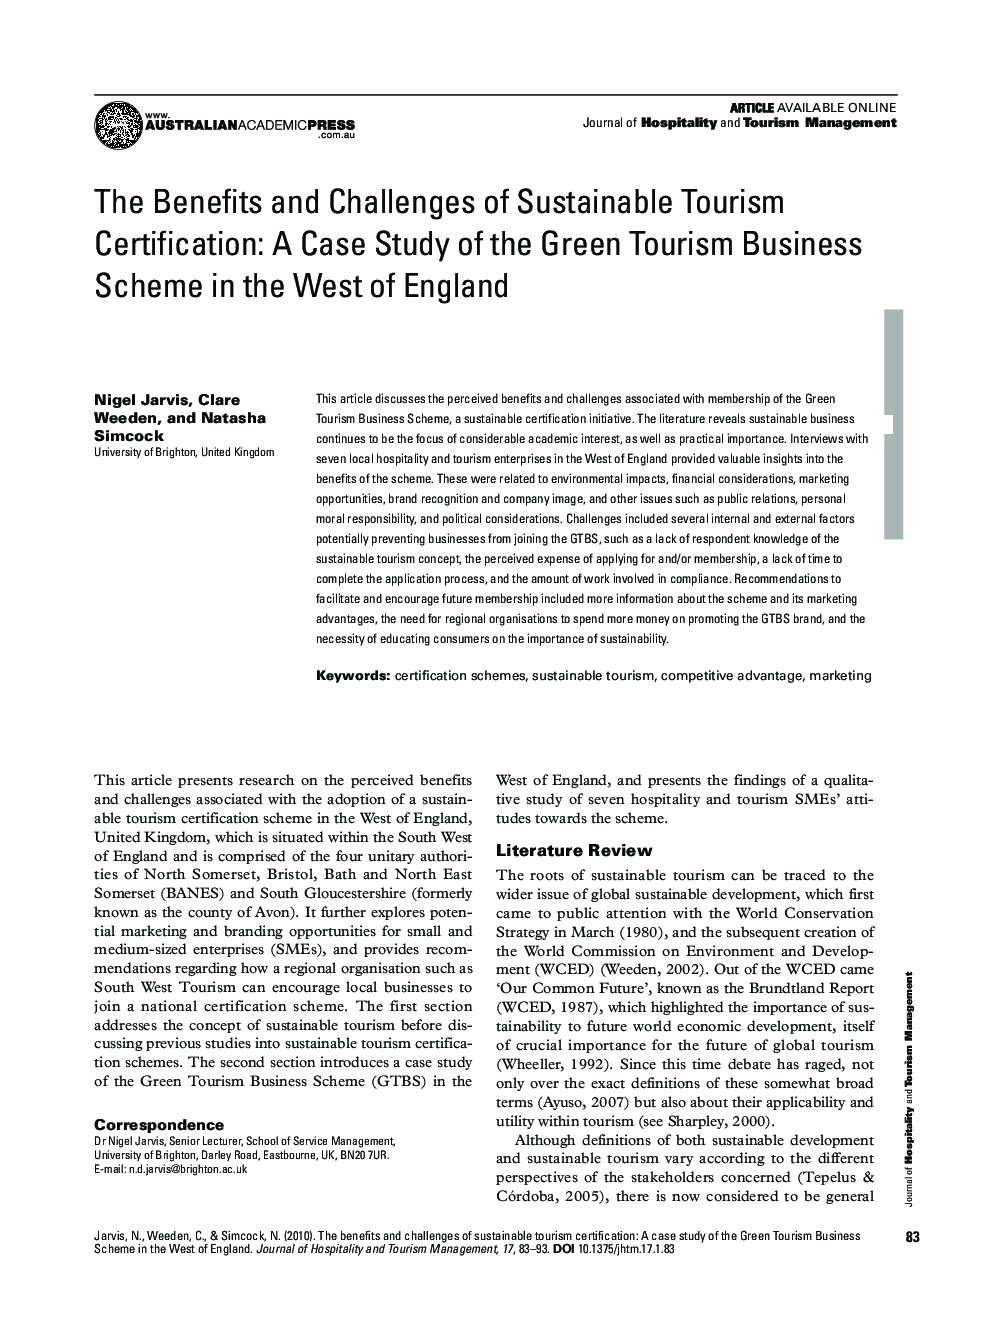 The Benefits and Challenges of Sustainable Tourism Certification: A Case Study of the Green Tourism Business Scheme in the West of England